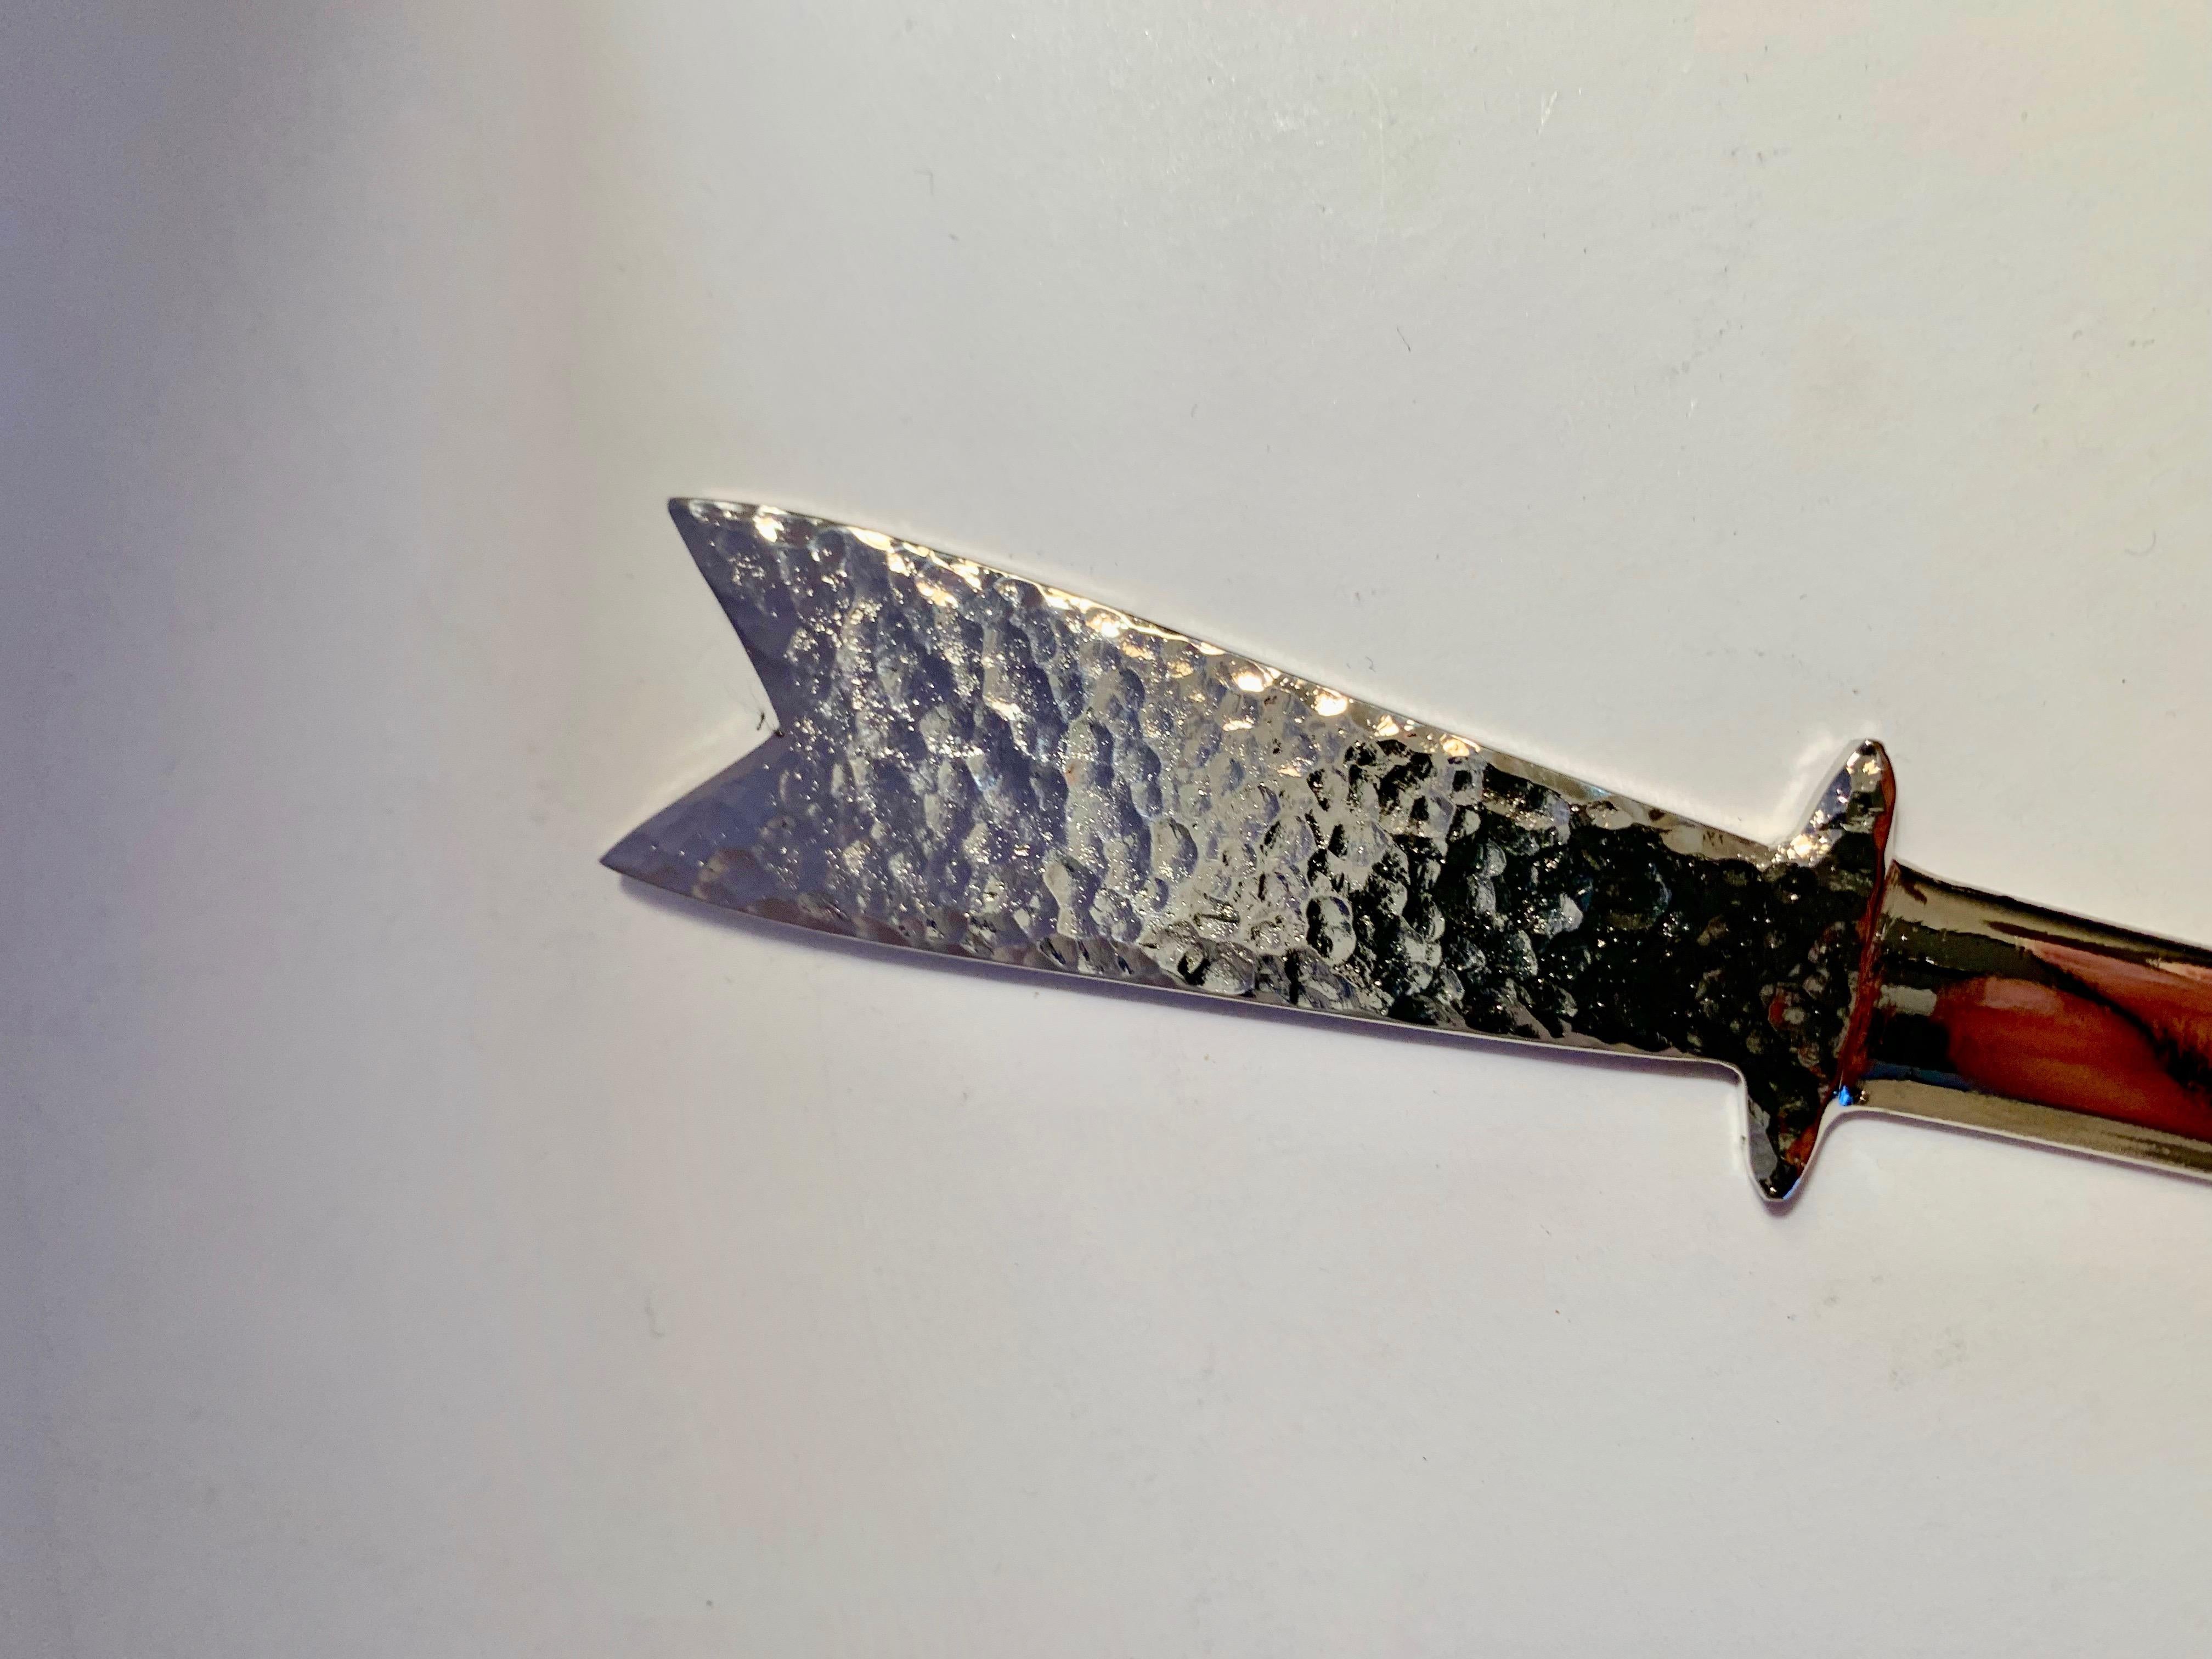 Custom silver plated hammered letter opener, great for the office or desk... also a nice book mark.